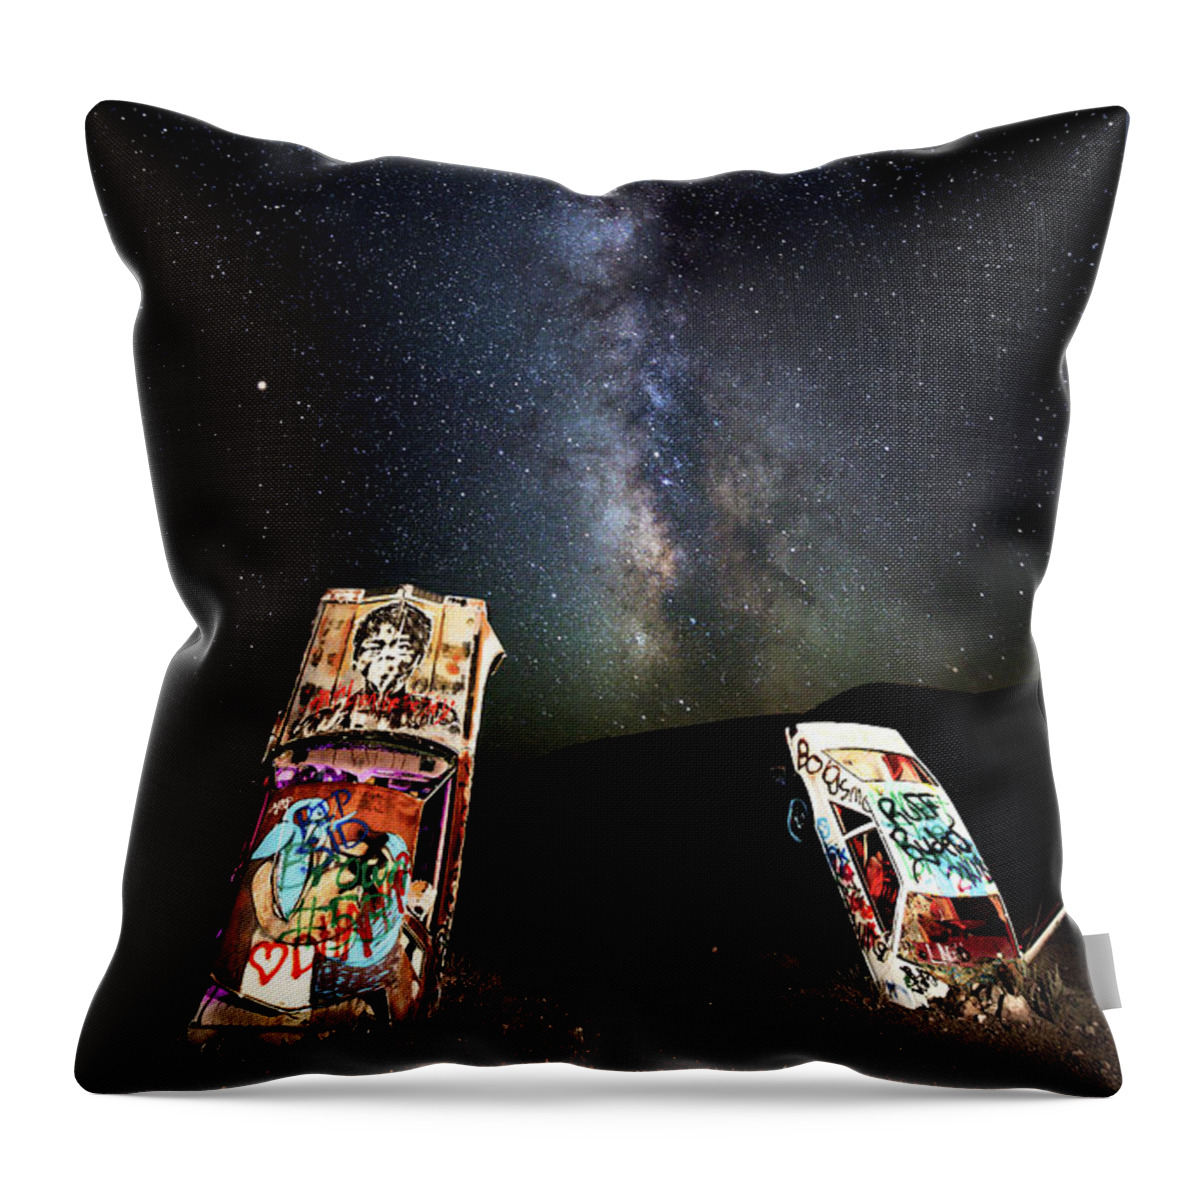 2018 Throw Pillow featuring the photograph Milky Way Over Mojave Desert Graffiti 1 by James Sage